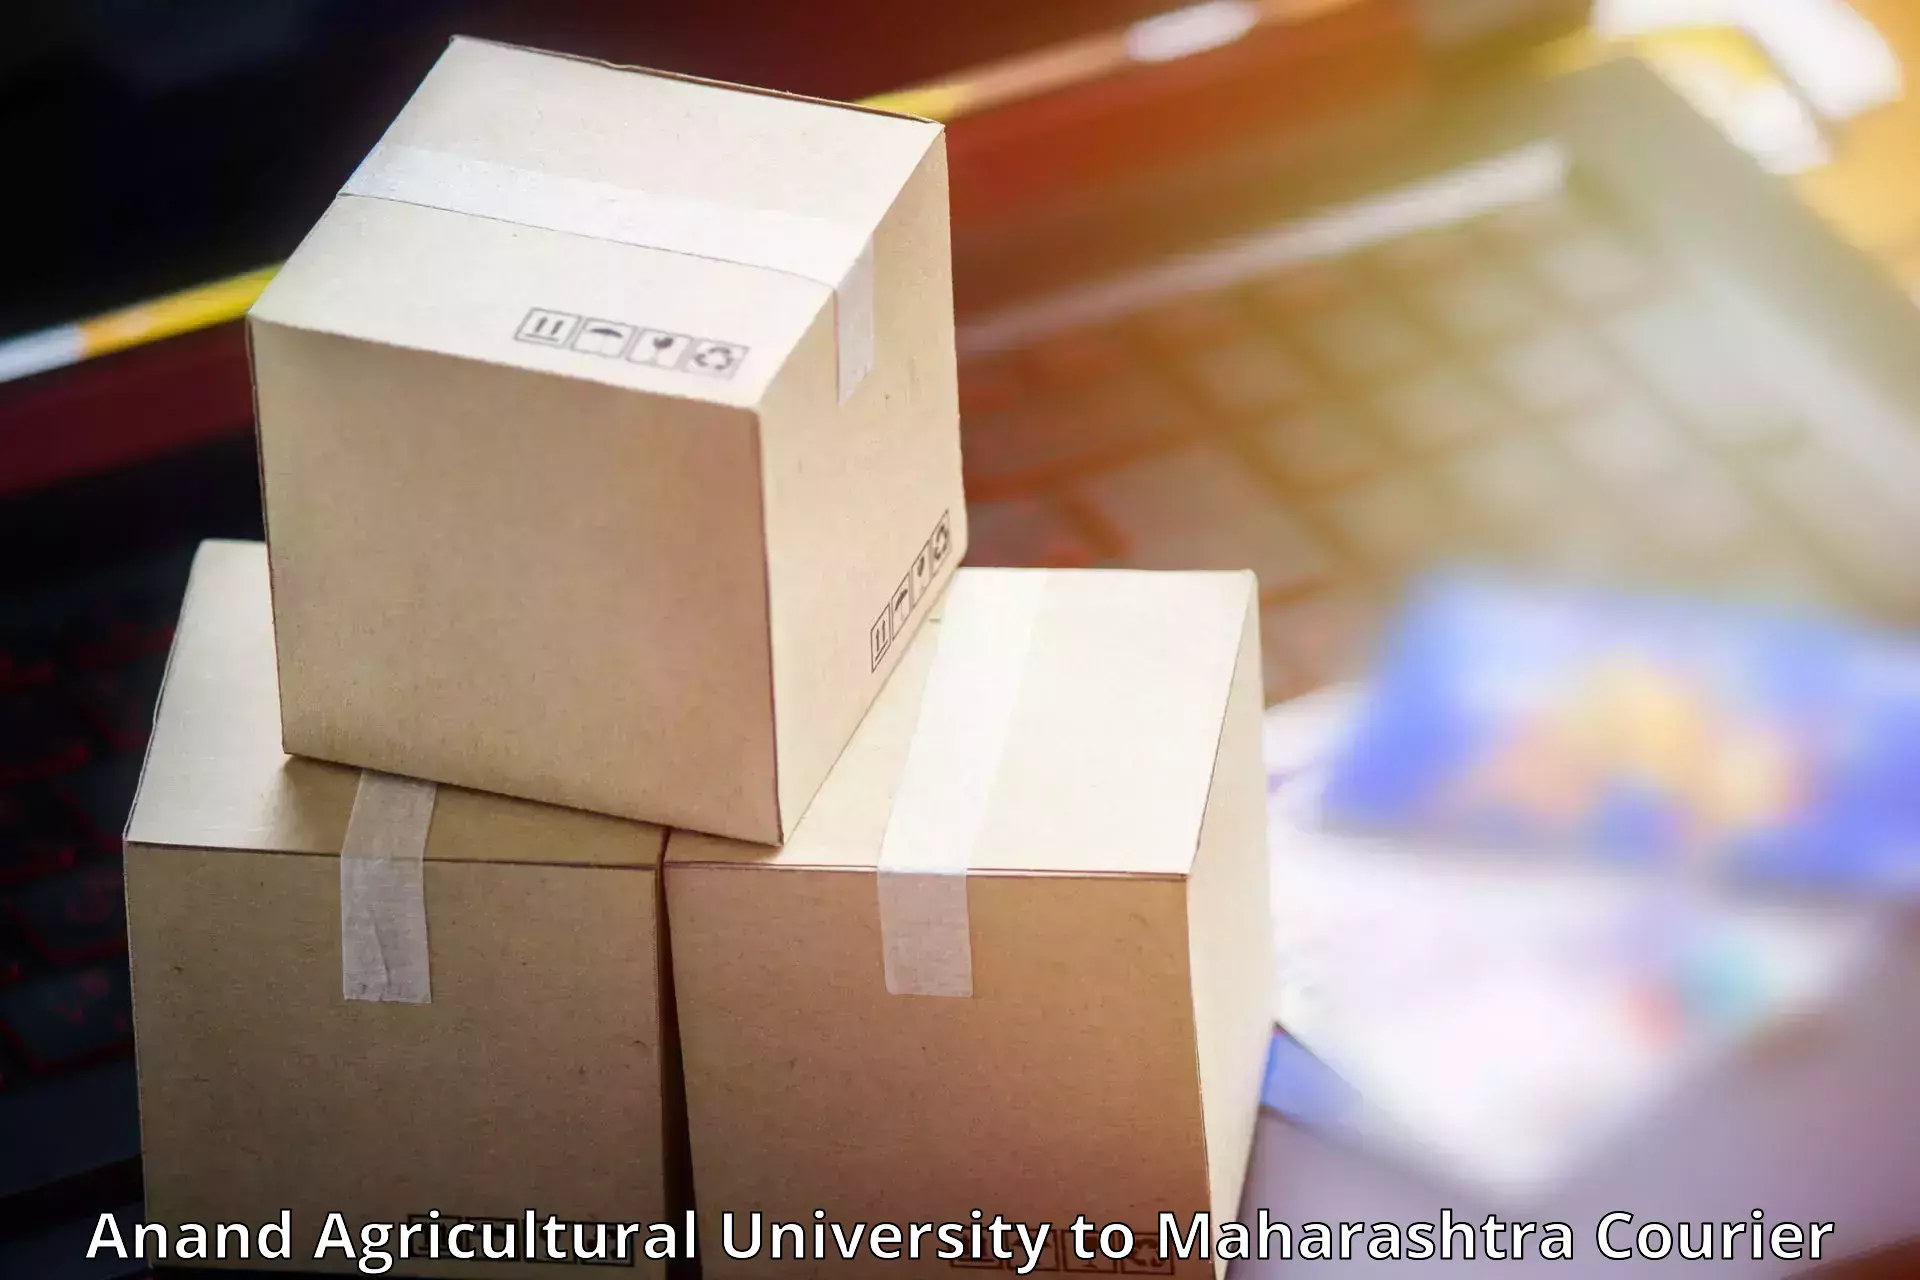 Punctual parcel services Anand Agricultural University to Pandharkawada